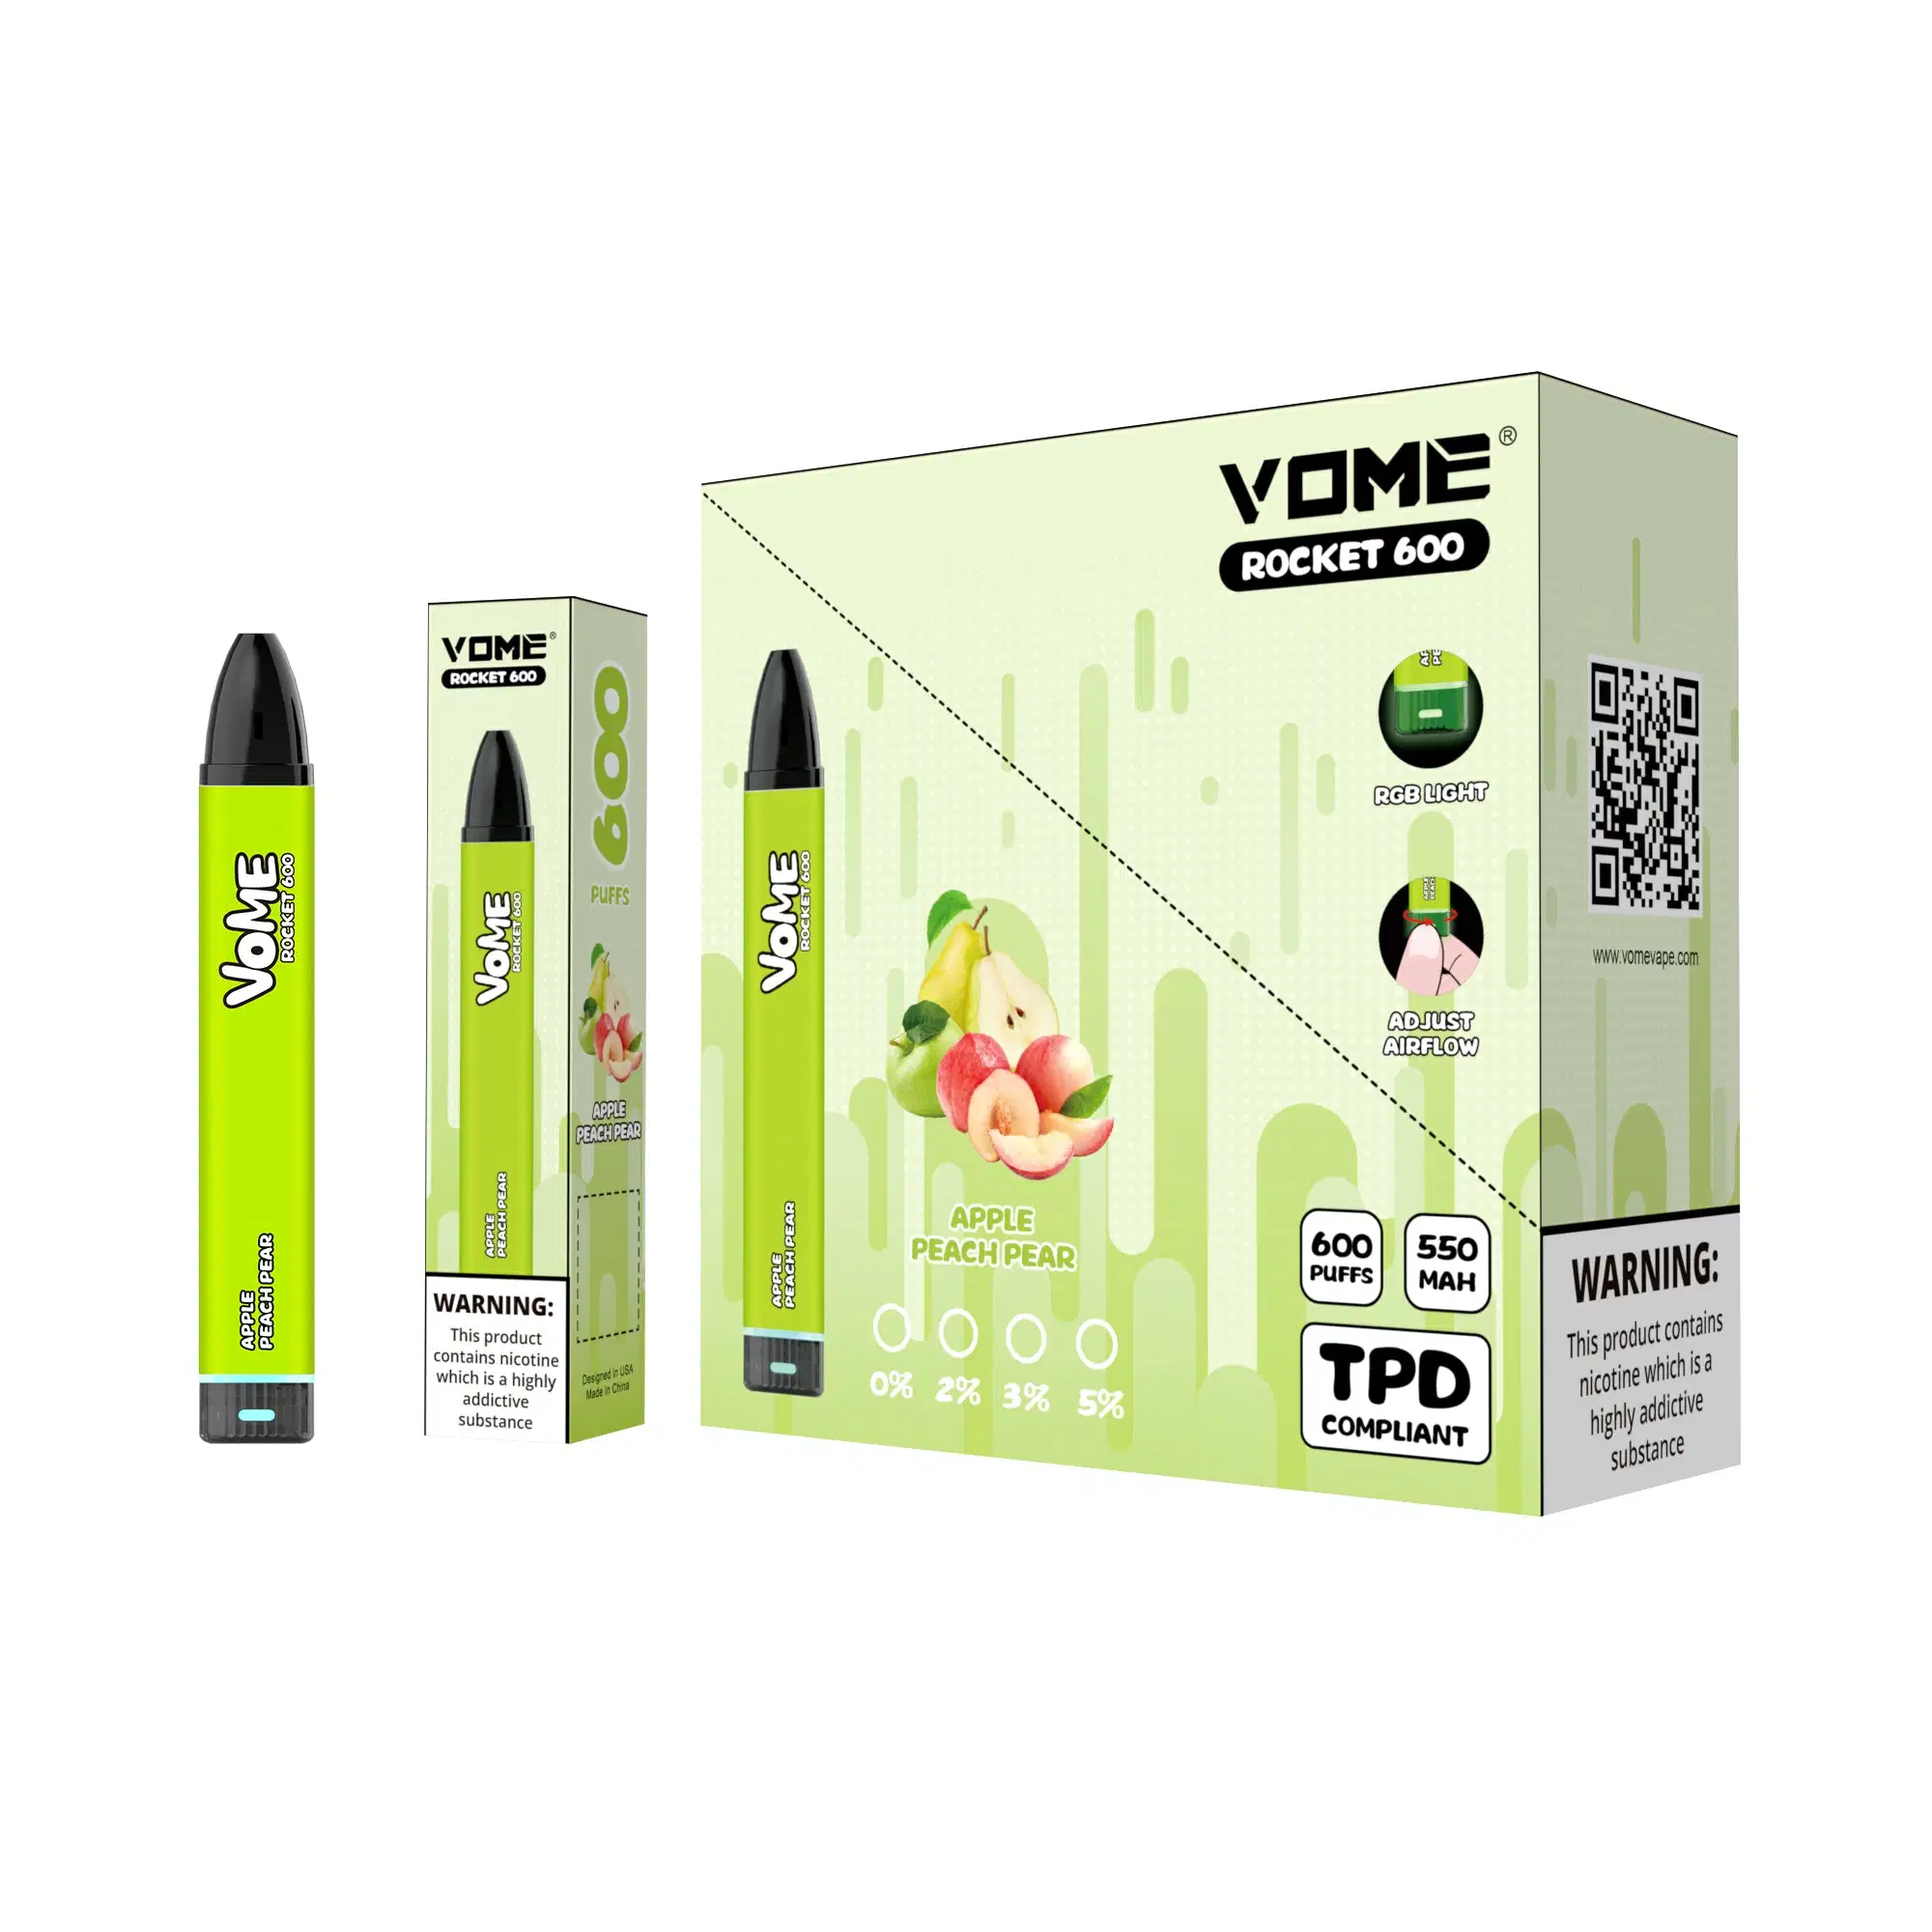 Vome Rocket 600 Puffs Airflow Control Disposable/Chargeable Vape Pod Device Tpd